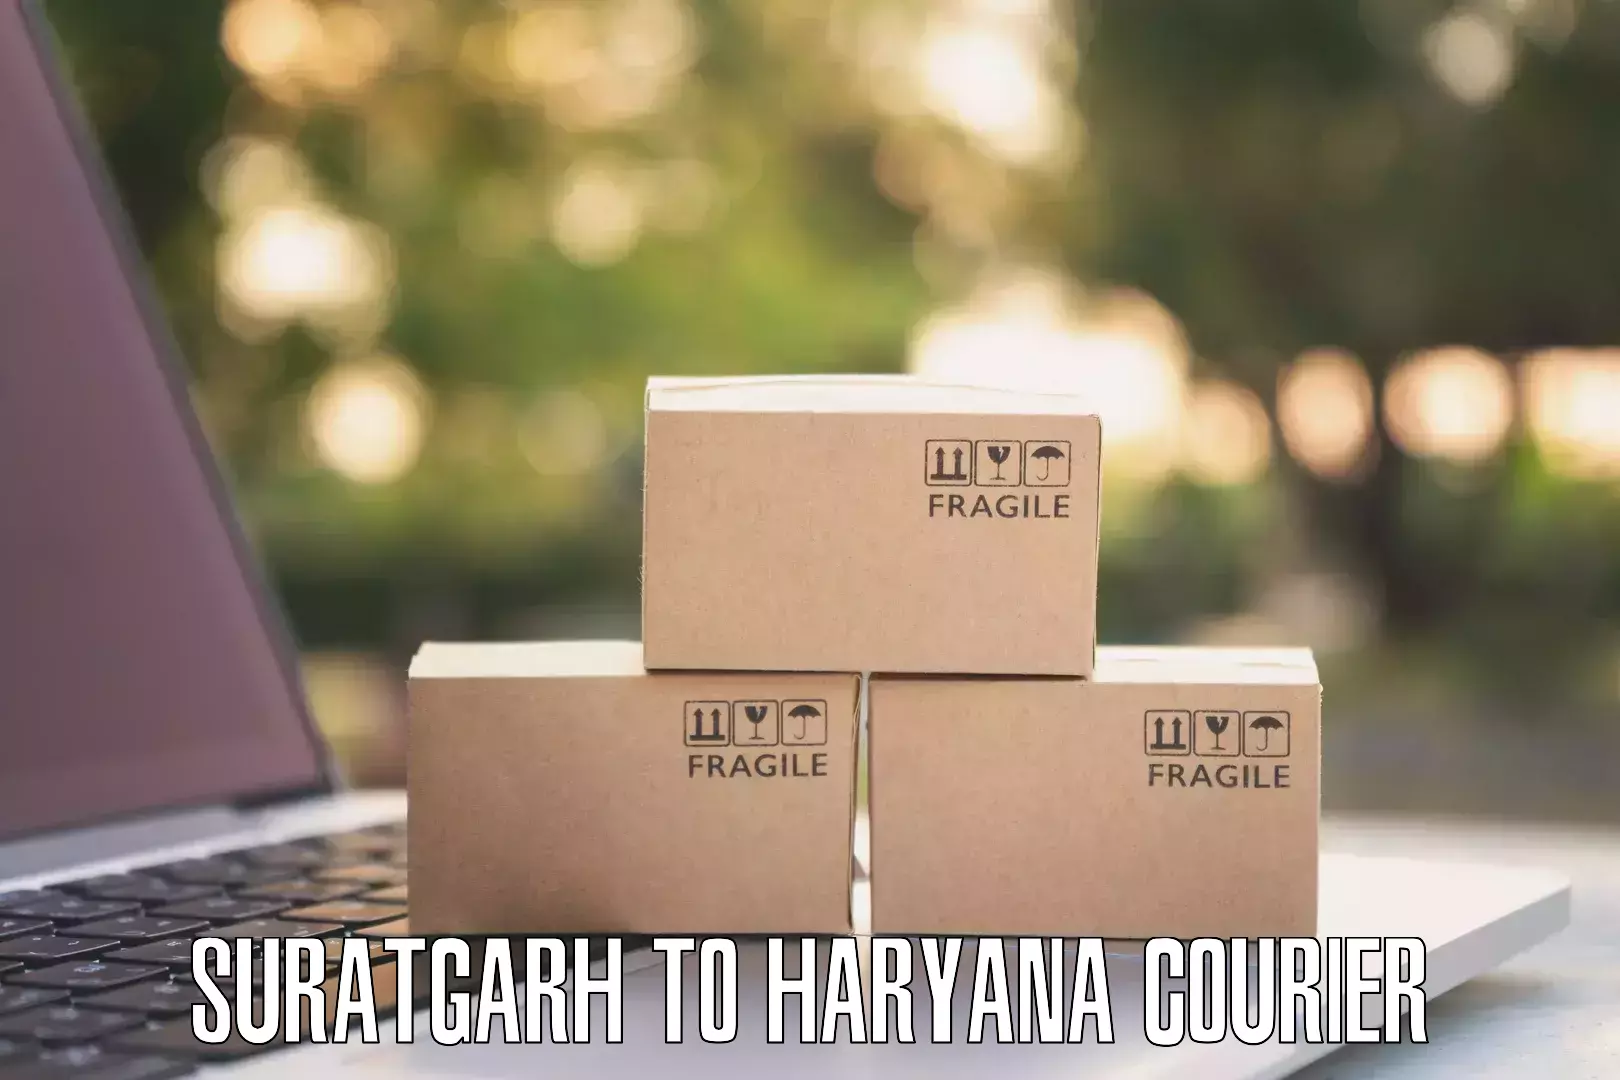 Parcel handling and care Suratgarh to Bhiwani